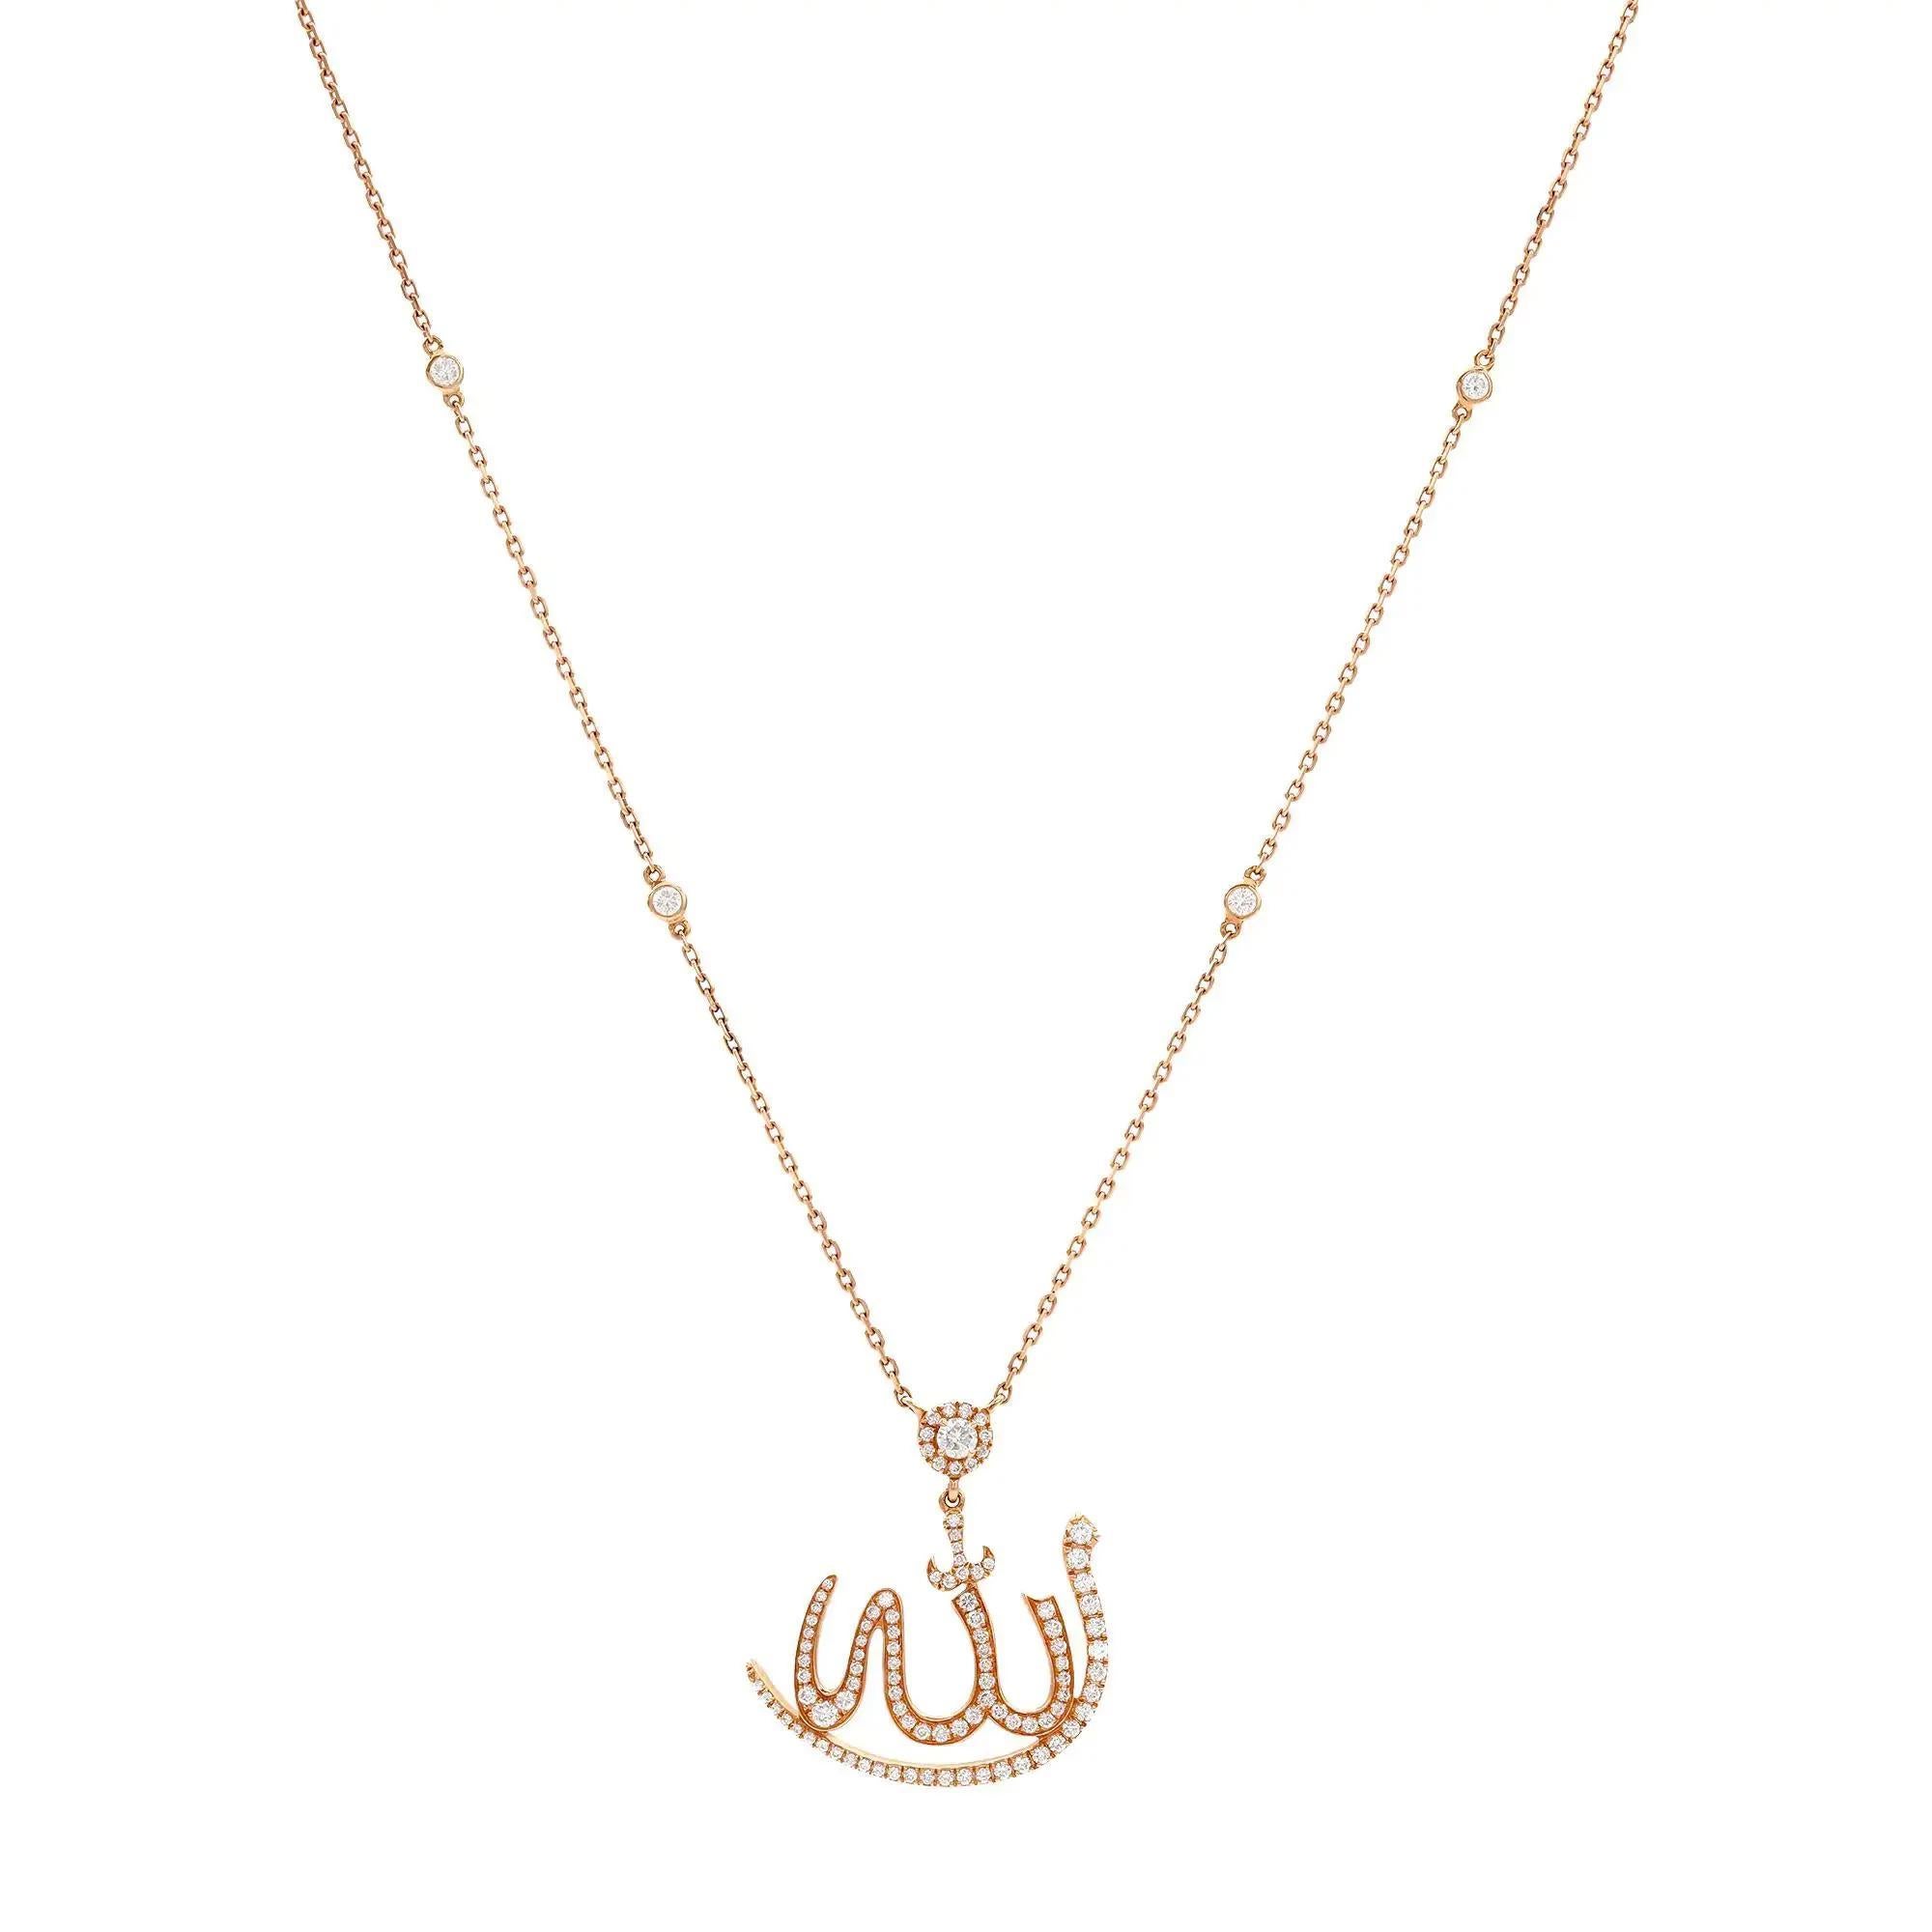 Messika 0.45Cttw Allah Diamond Pendant Necklace 18K Rose Gold 17.5 Inches